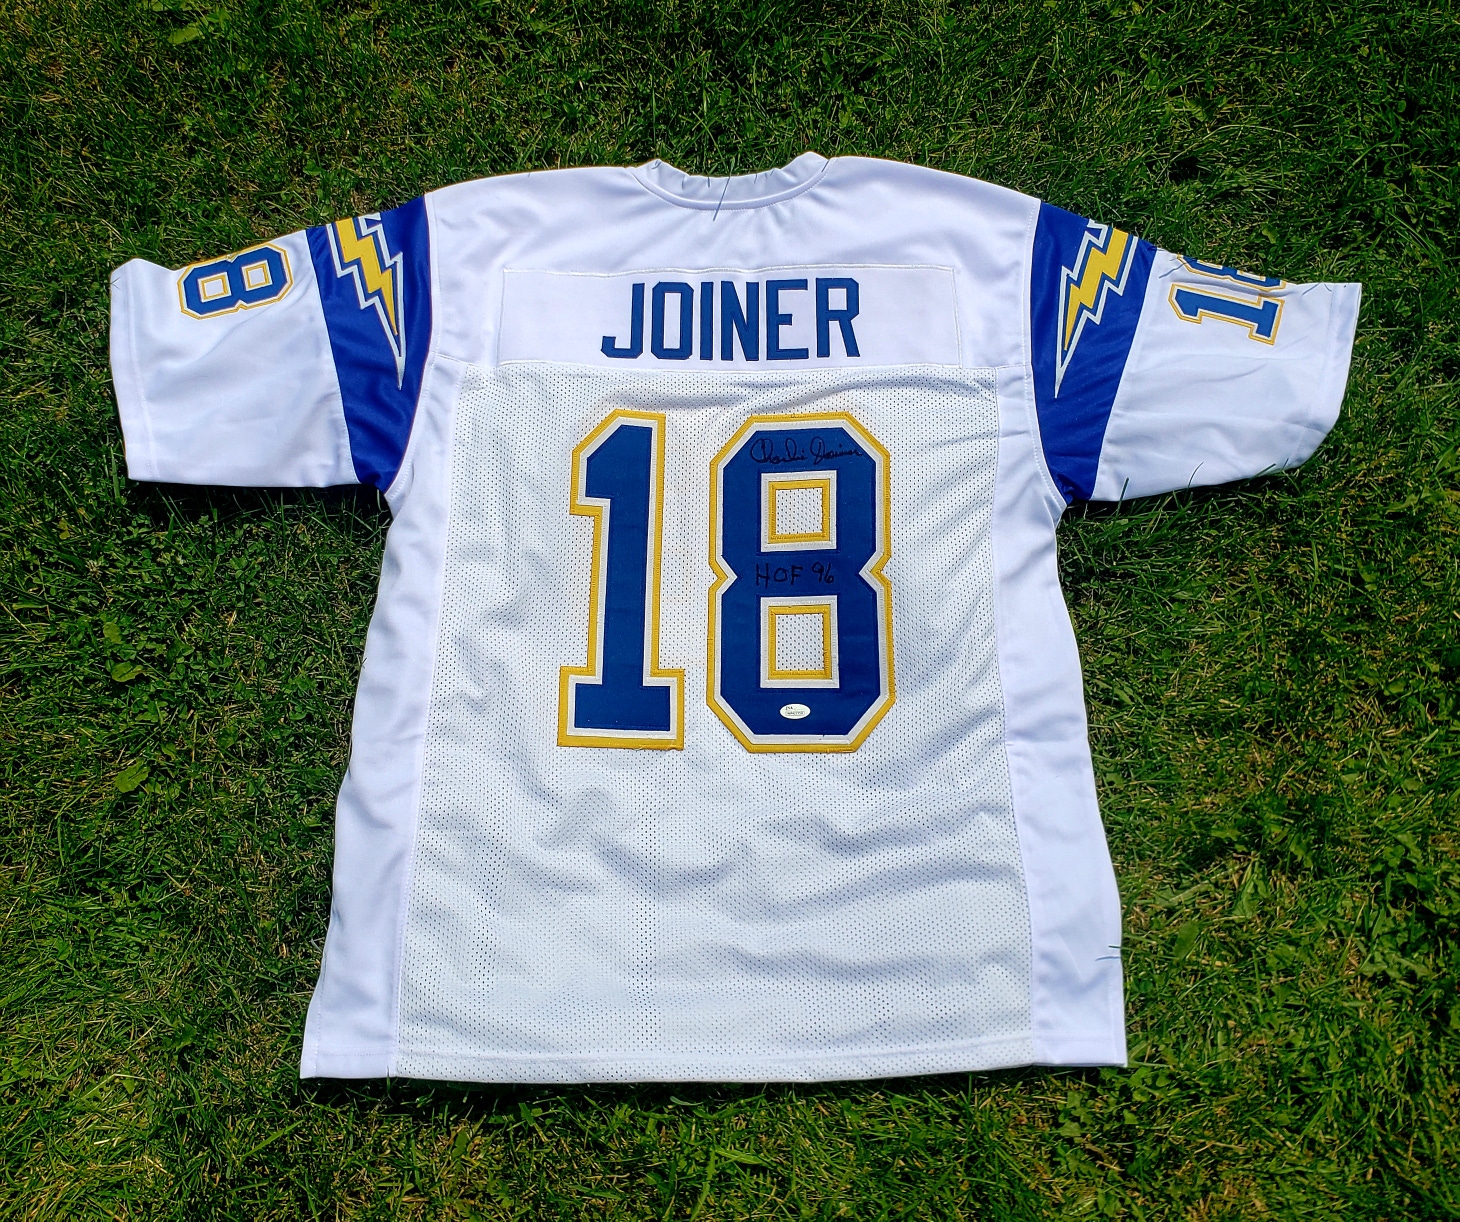 San Diego Chargers Jersey signed by Charlie Joiner